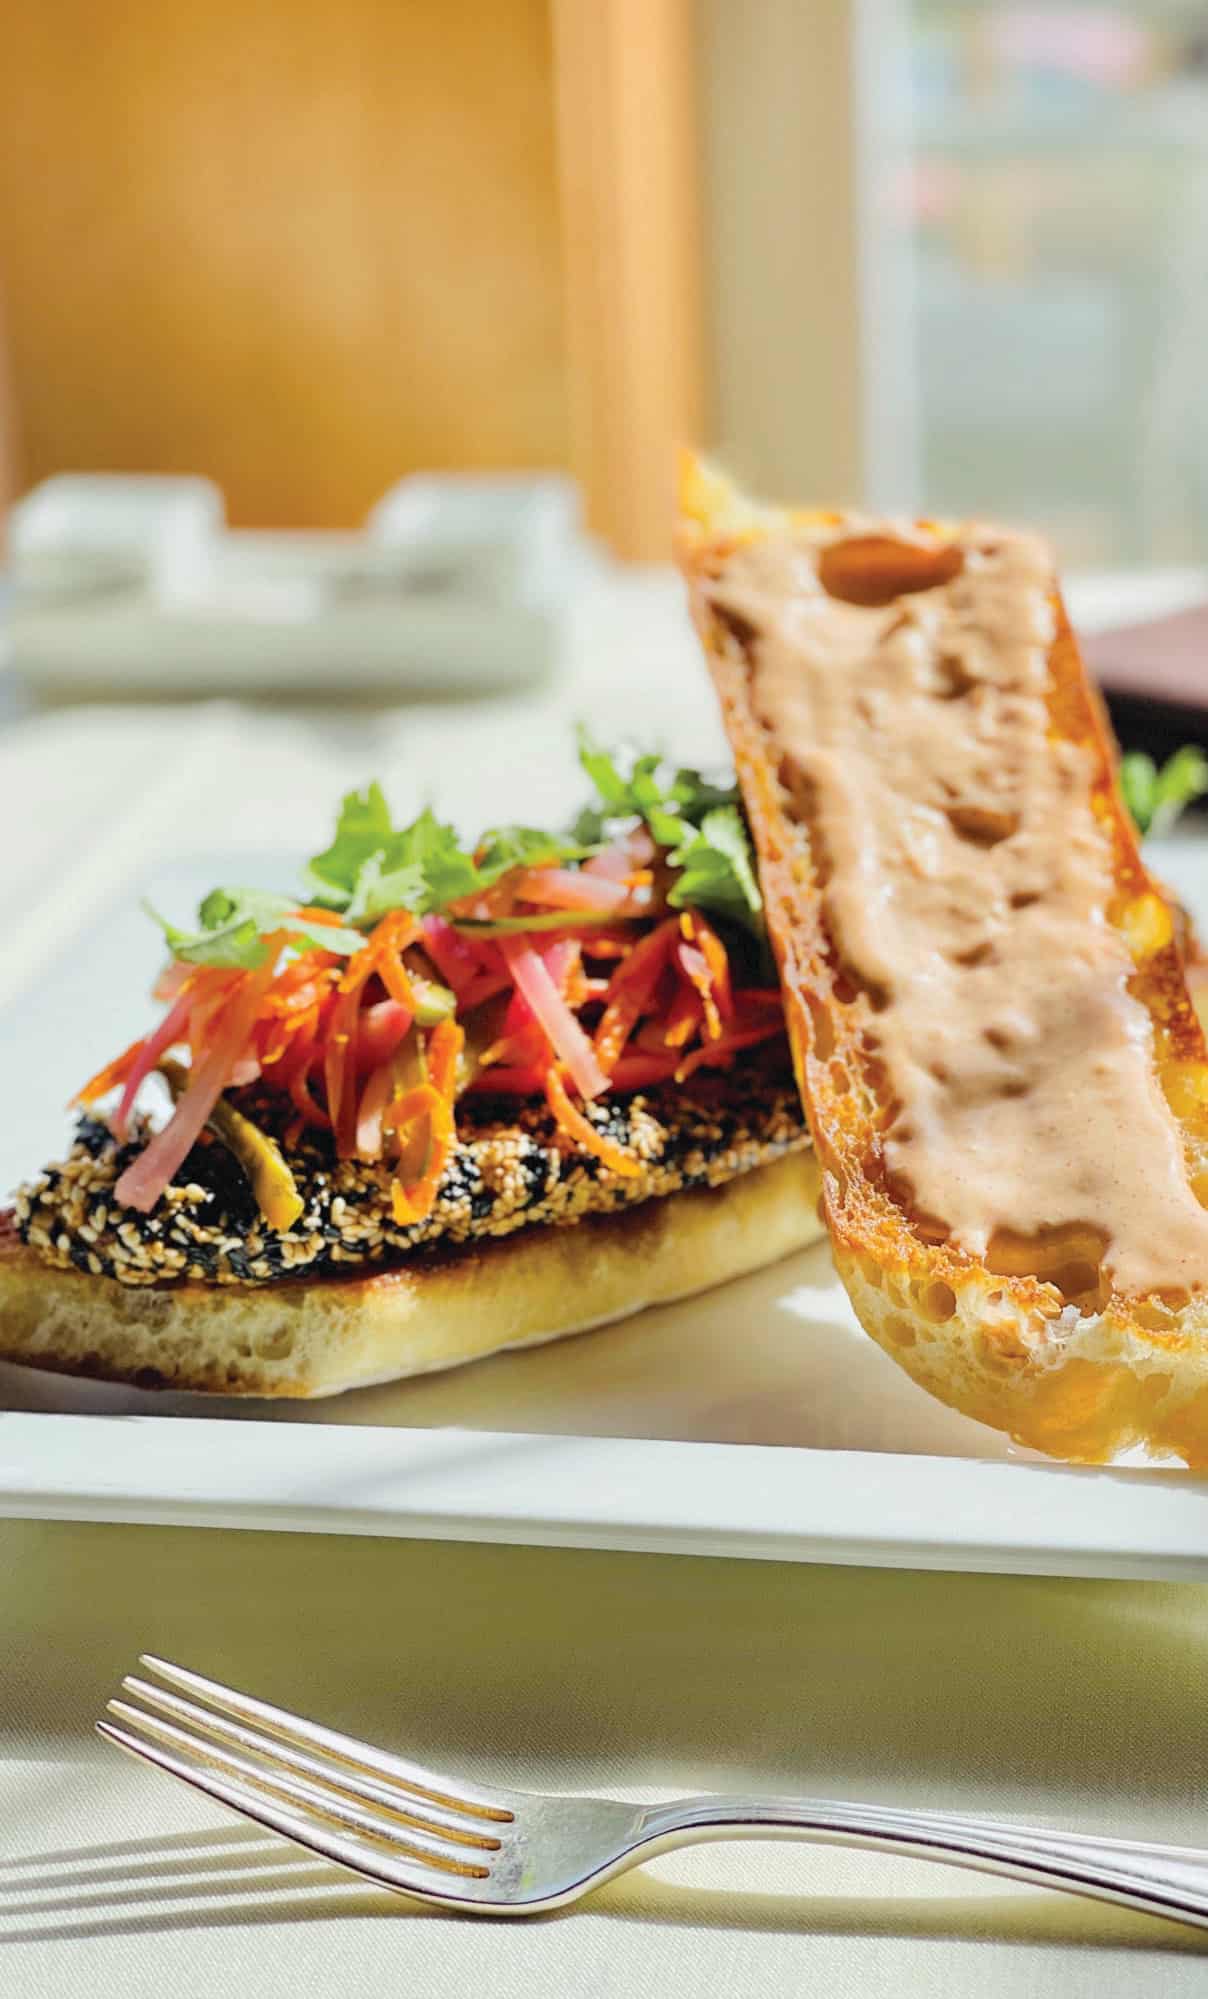 The perfect pairing of French baguette and Oregon rockfish is revealed in Stephanie Inn’s sesame-crusted rockfish banh mi.